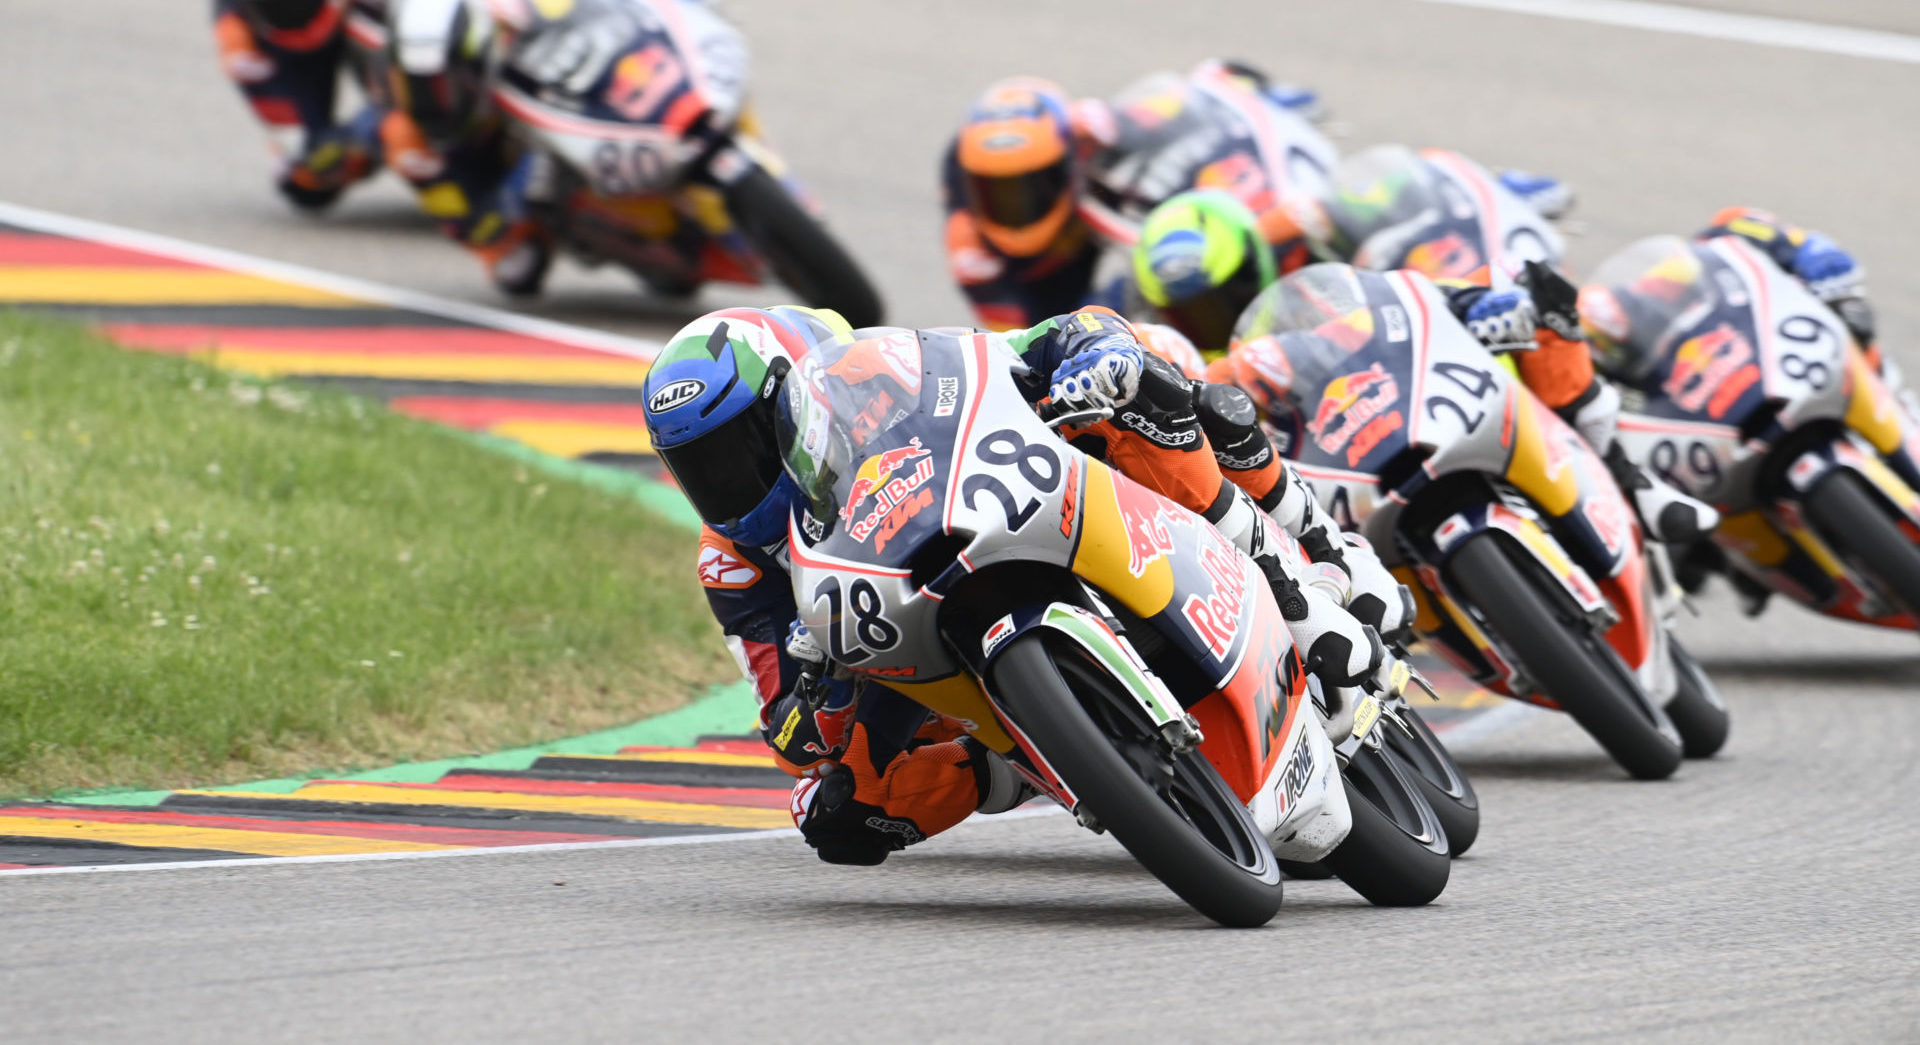 Matteo Bertelle (28) leads Ivan Ortola (24), Marcos Uriarte (89), and the rest of the Red Bull MotoGP Rookies Cup field during Race Two at Sachsenring. Photo courtesy Red Bull.